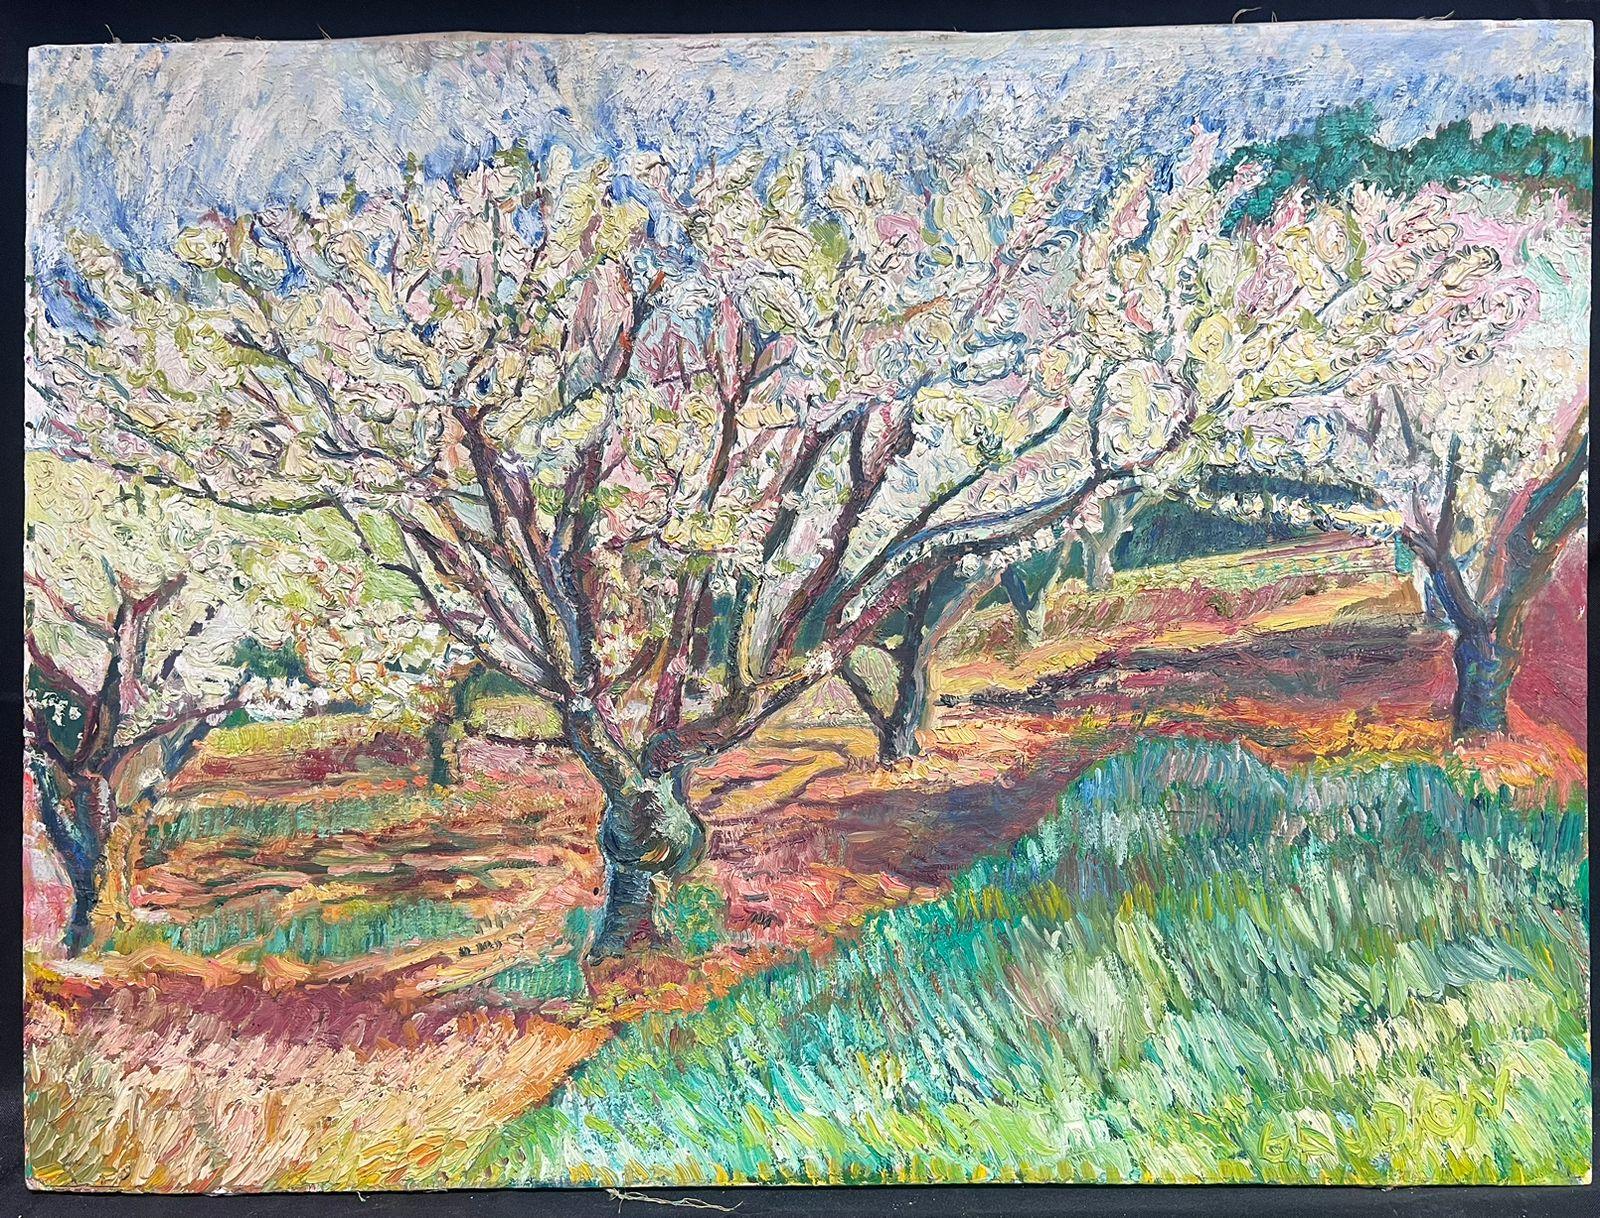 Olive Groves in Provence
French post-impressionist, circa 1930's
indistinctly signed verso
oil on canvas, unframed
canvas: 21.5 x 29 inches
provenance: private collection, Aix-en-Provence, France
condition: very good and sound condition